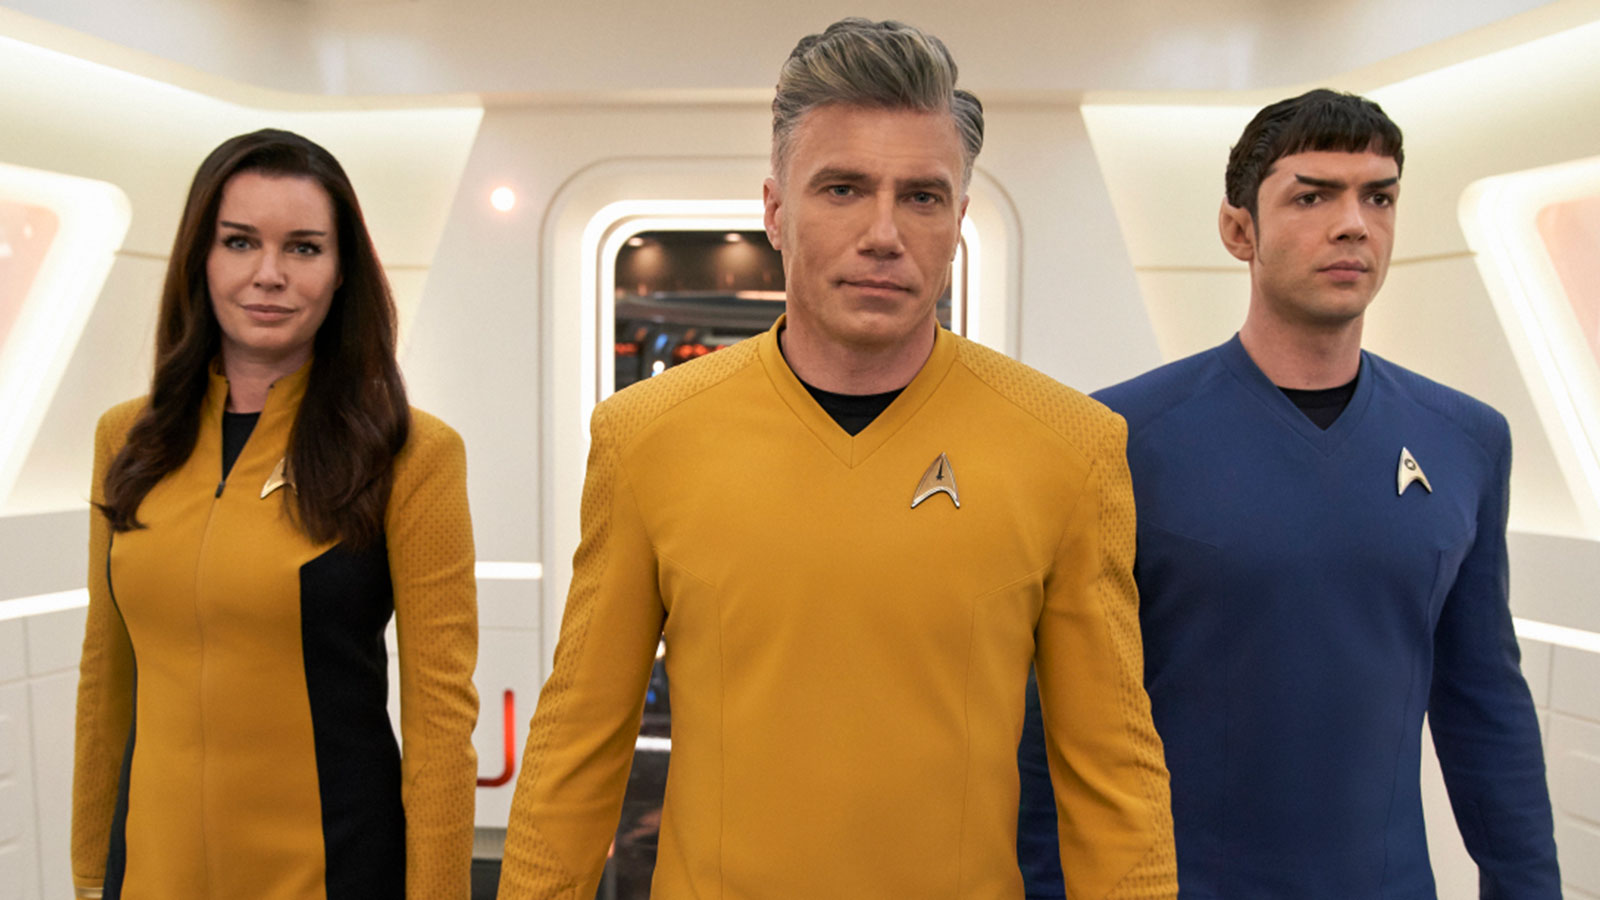 The ‘Strange New Worlds’ cast talk bringing the characters to life, fandom, and their responsibility to Star Trek